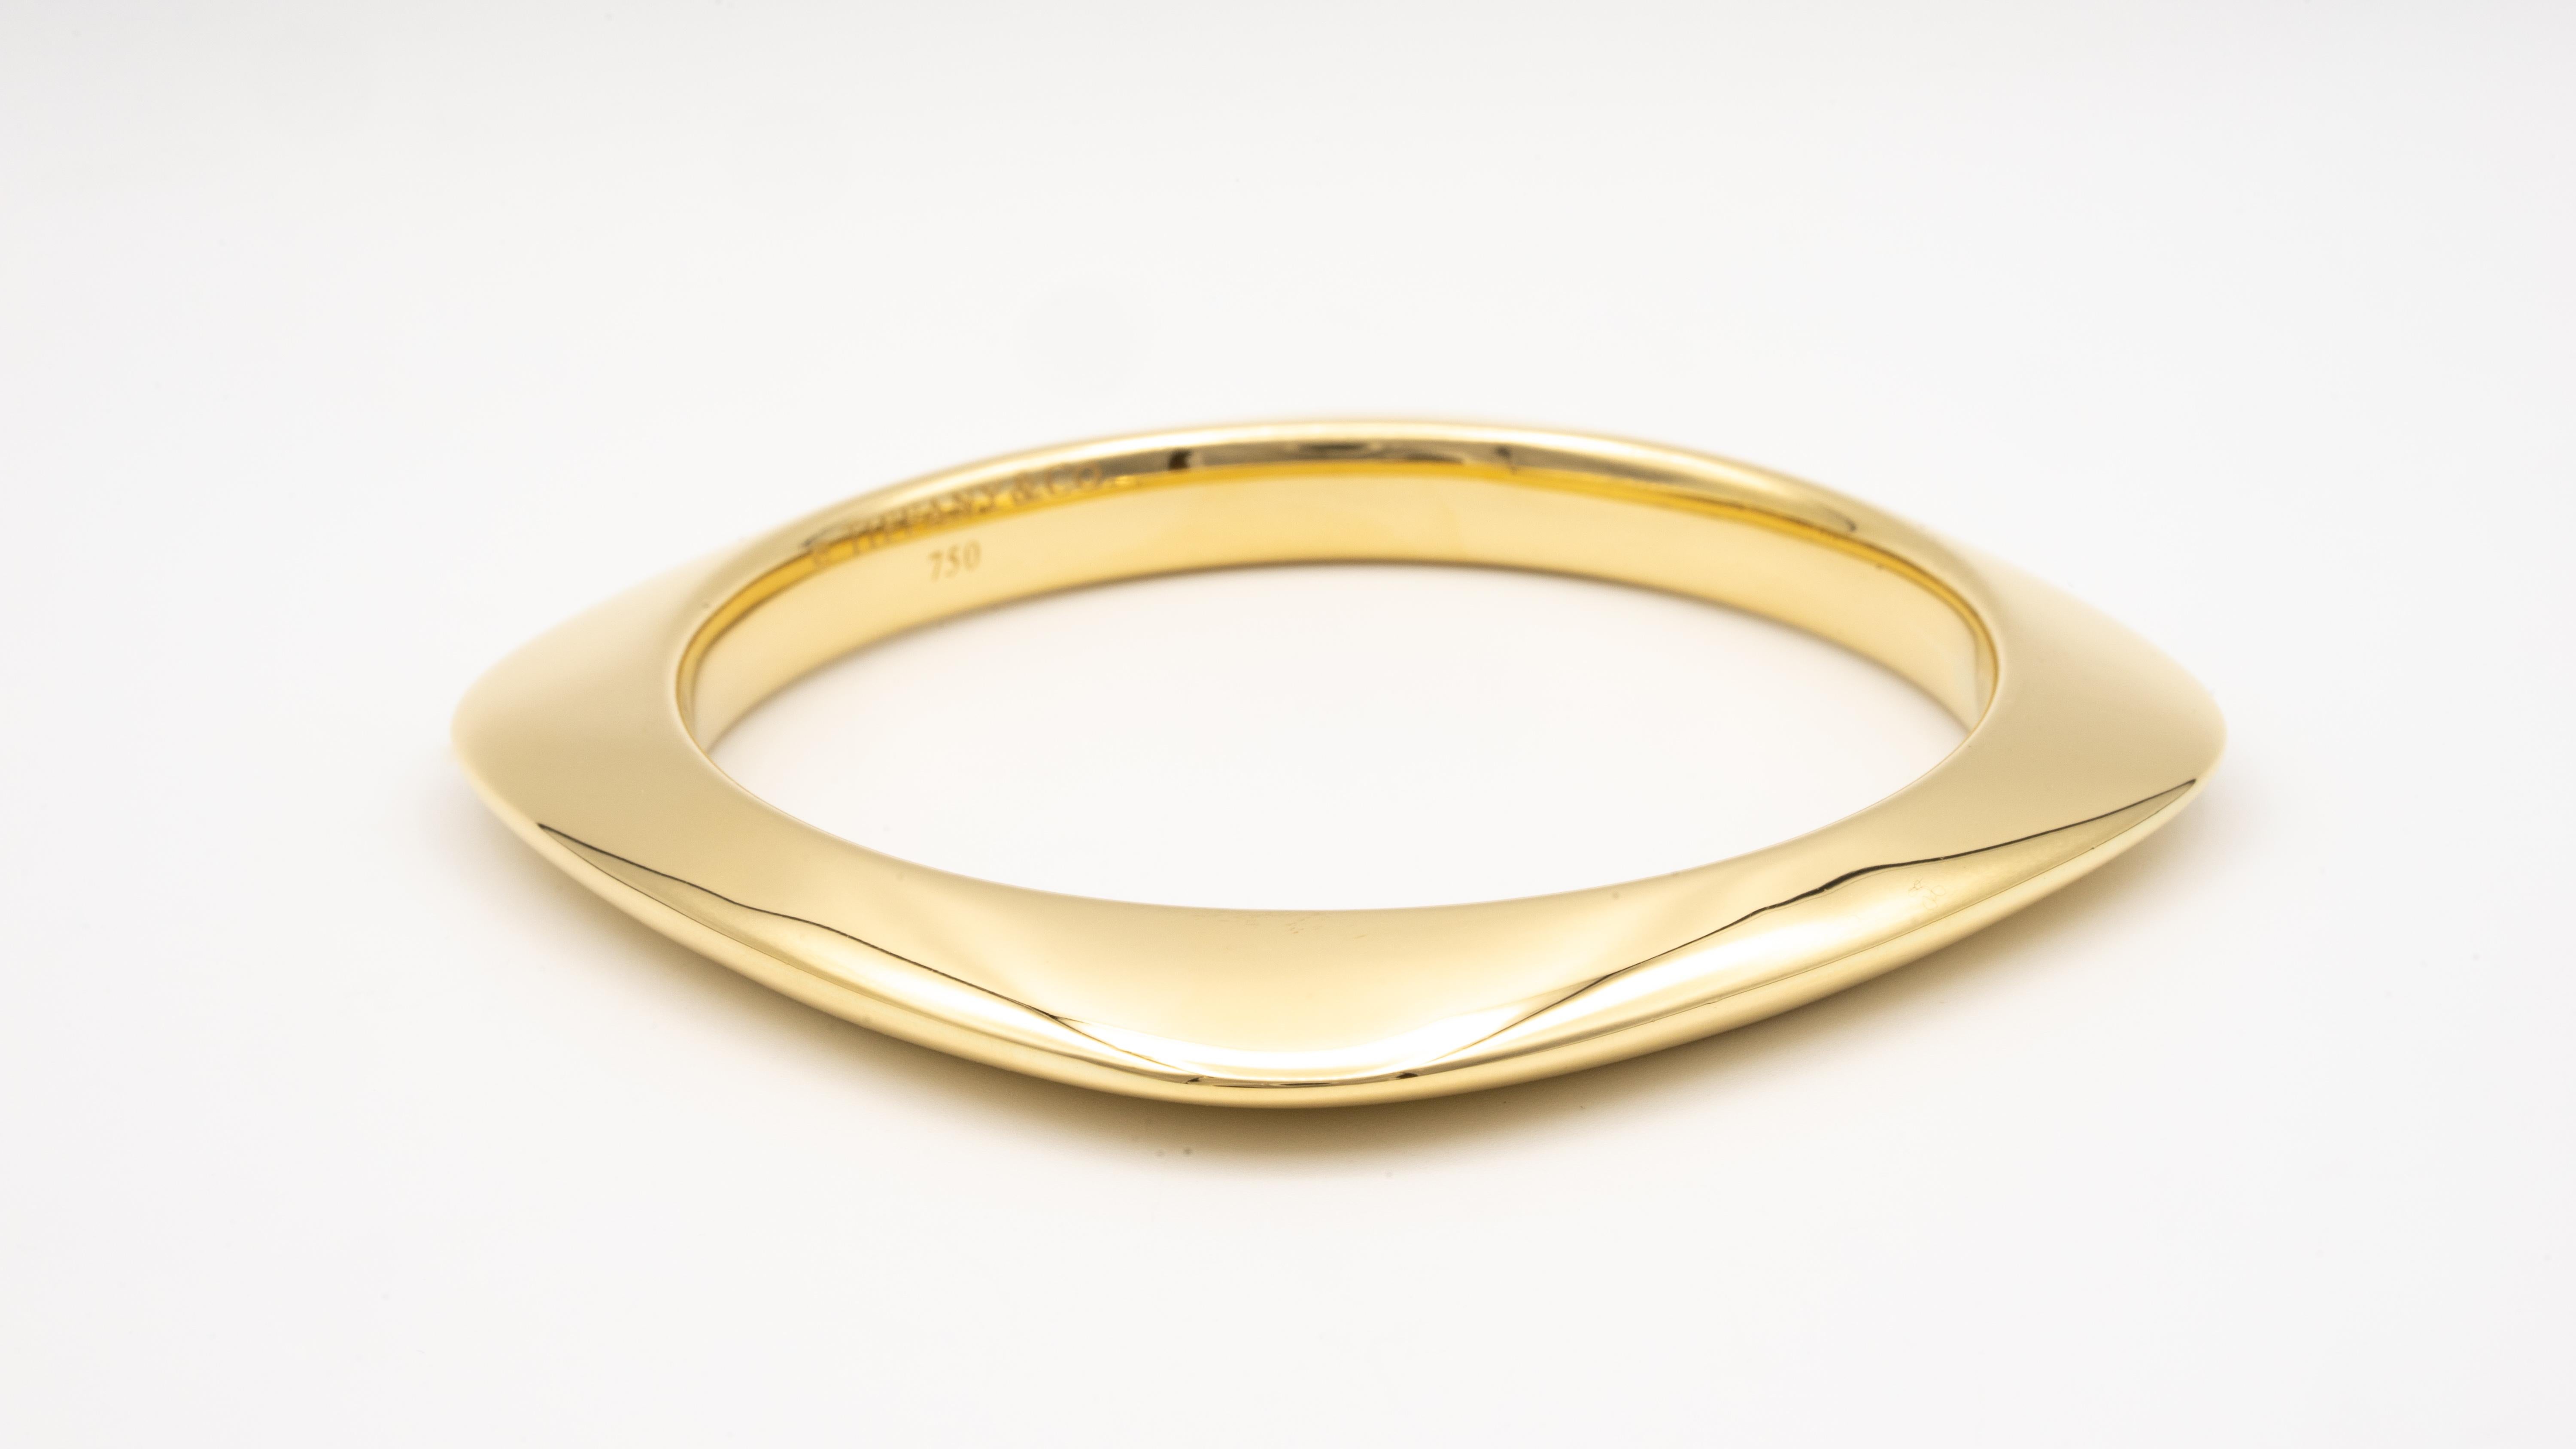 Tiffany & Co. Square cushion shaped bangle finely crafted in high polished 18 Karat yellow gold with round shape on the inside.
Measurement: inner circumference: 8 inches x 0.45